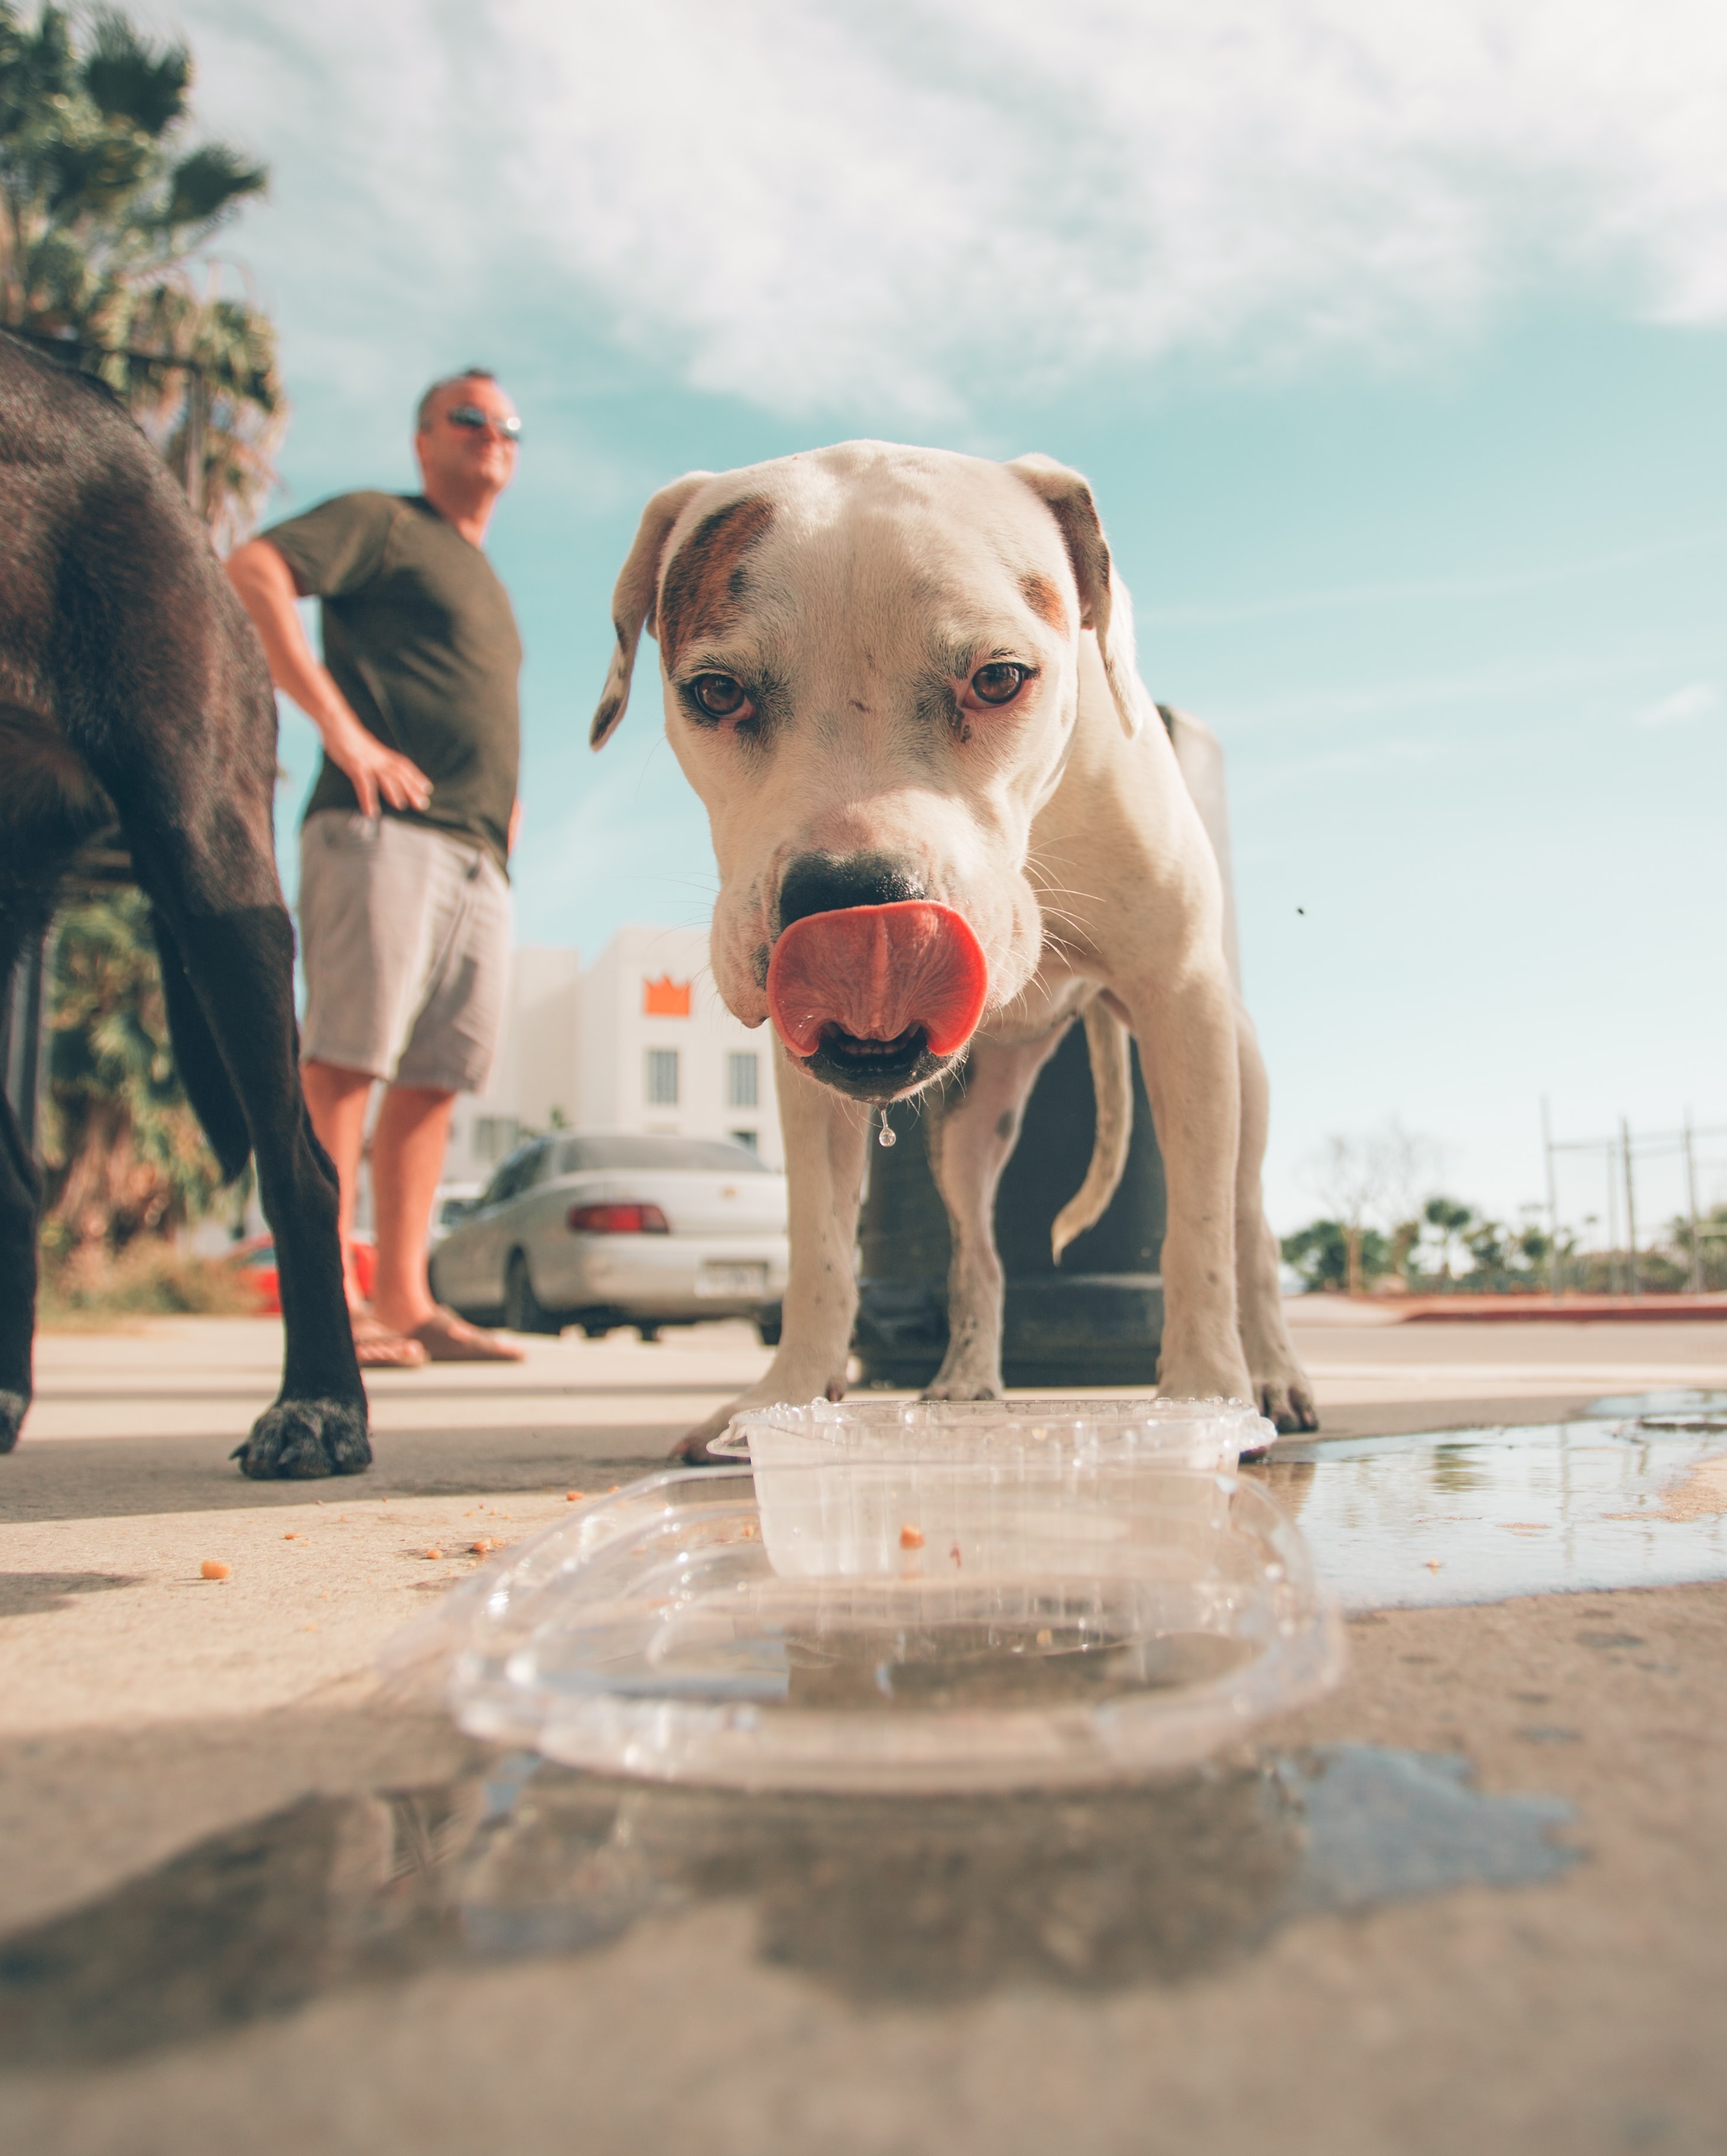 dog drinking water from a bowl outside during hot weather